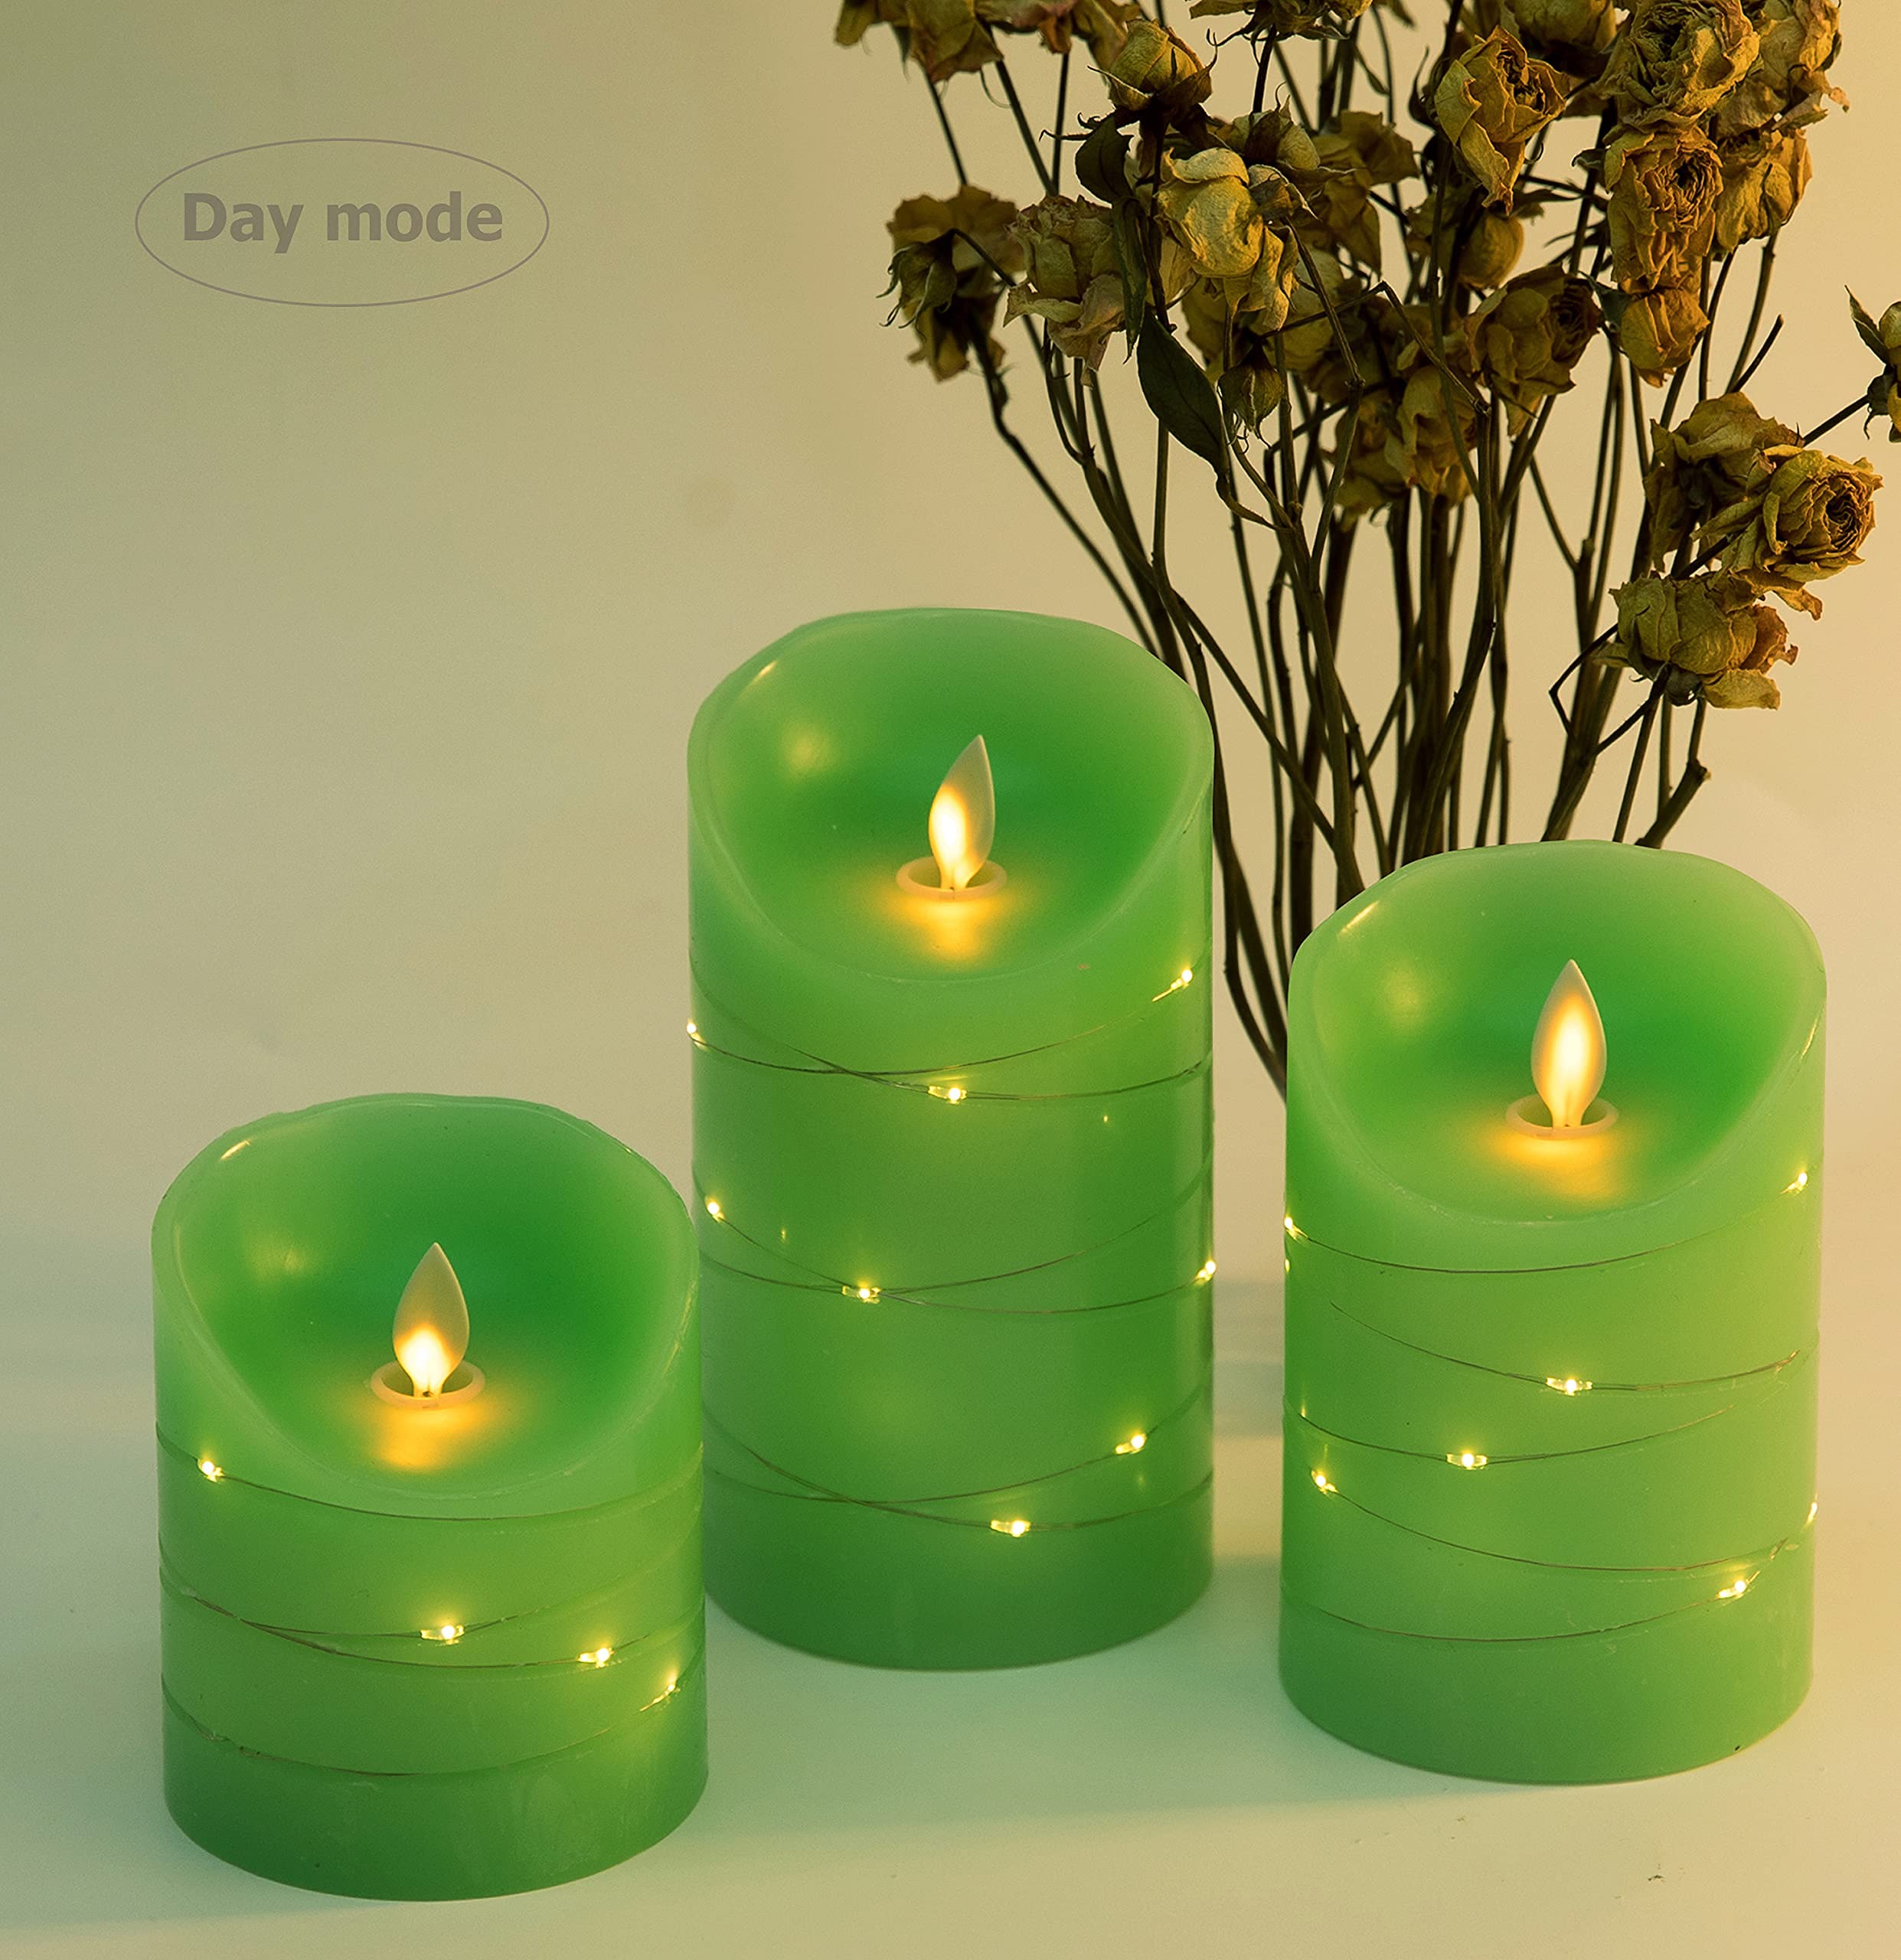 Green LED flameless Candle with Embedded Starlight String, 3 LED Candles, 10-Key Remote Control, 24-Hour Timer Function, Dancing Flame, Real Wax, Battery Powered. (Grass Green)